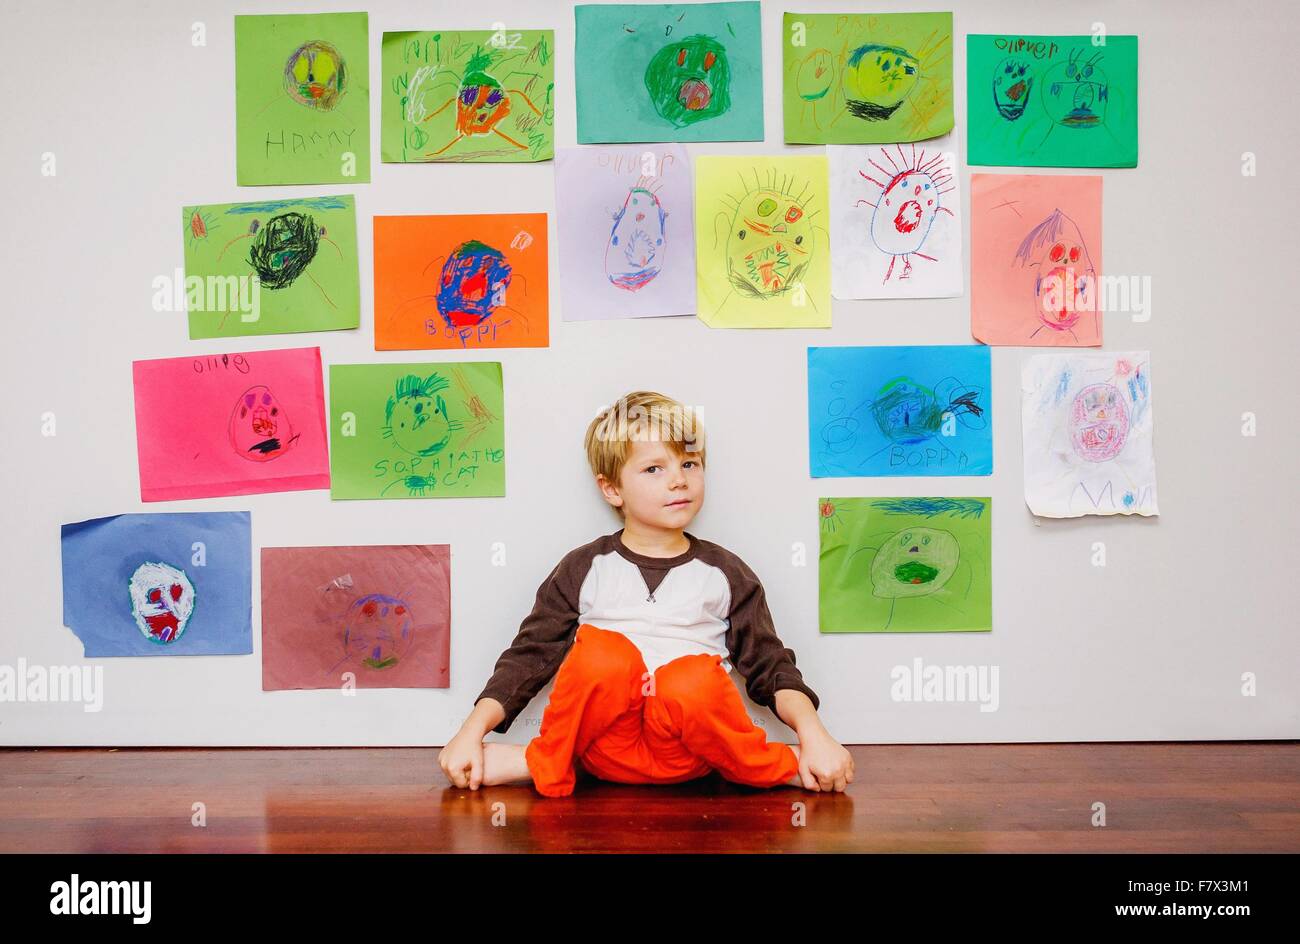 Boy sitting by wall covered in paintings and drawings Stock Photo